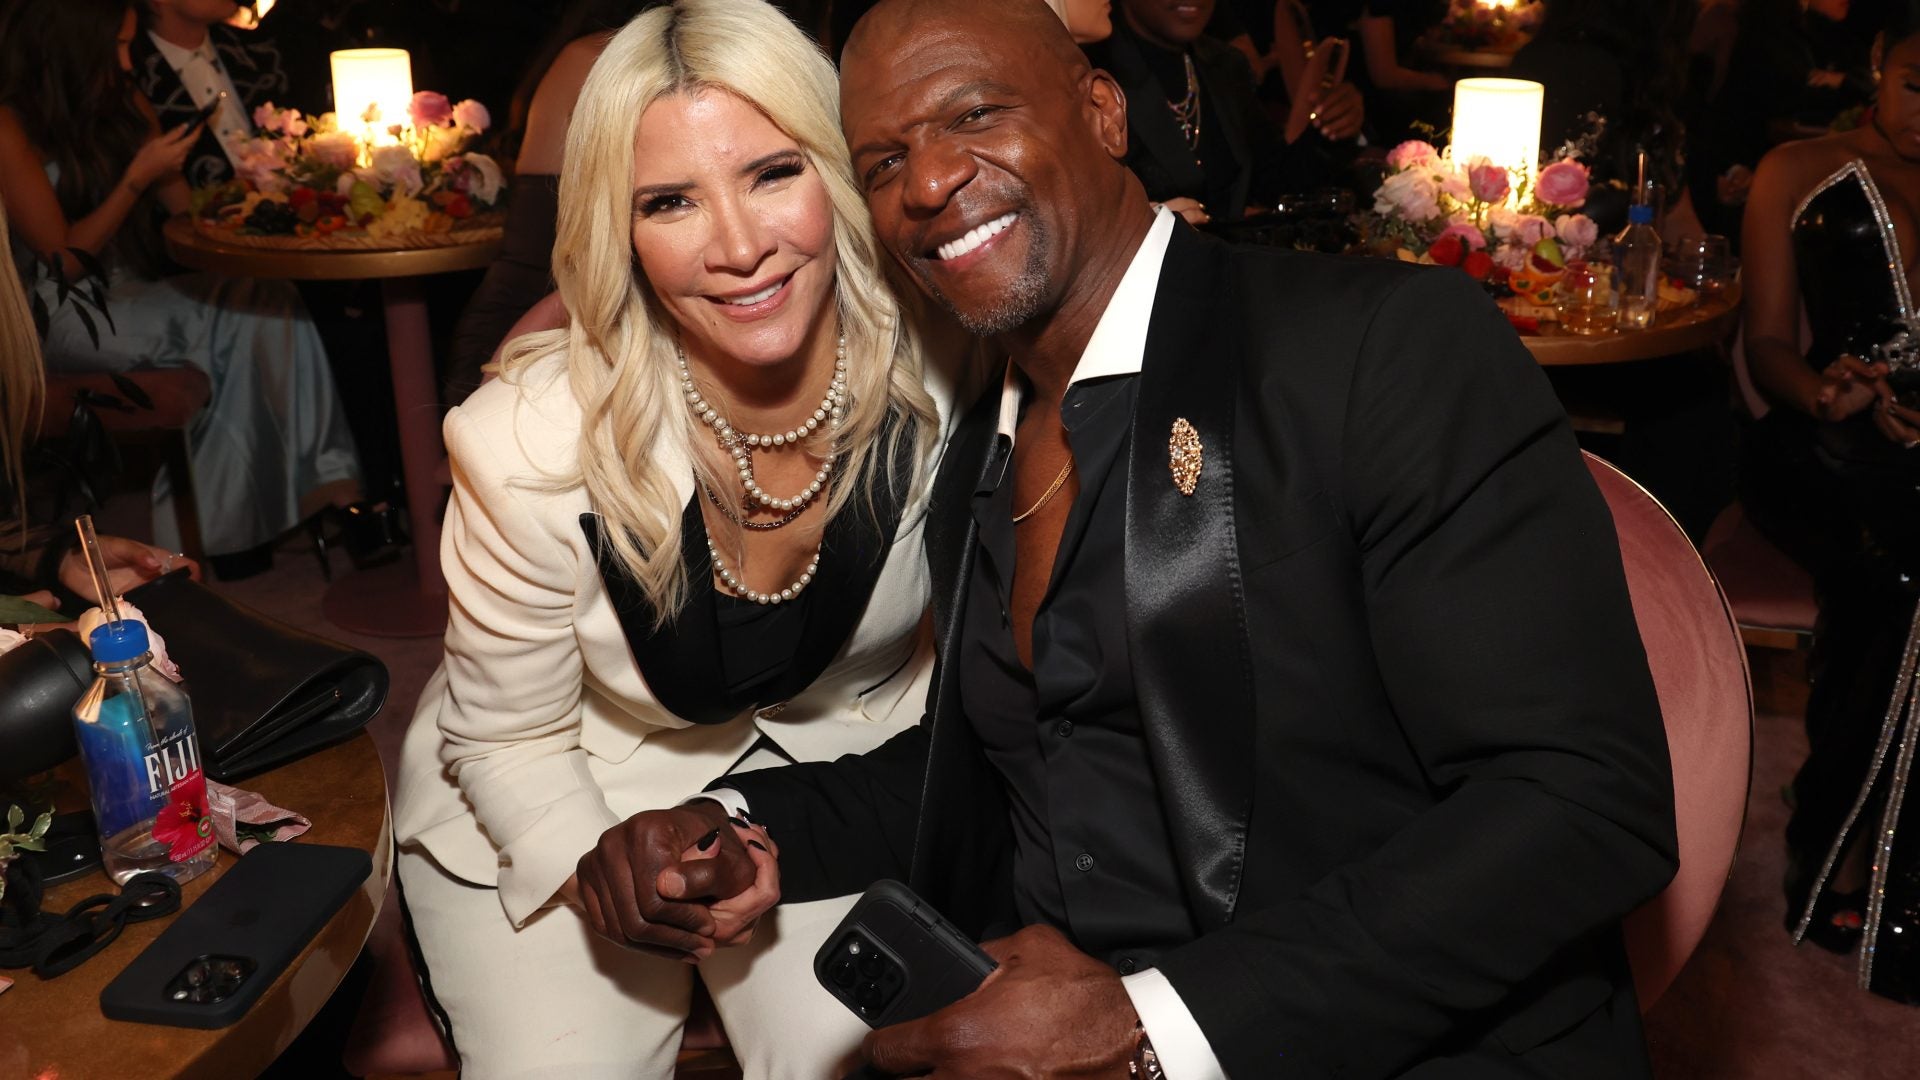 Terry Crews Sets The Record Straight For People Who Question Wife Rebecca's Racial Identity: 'She's Black'